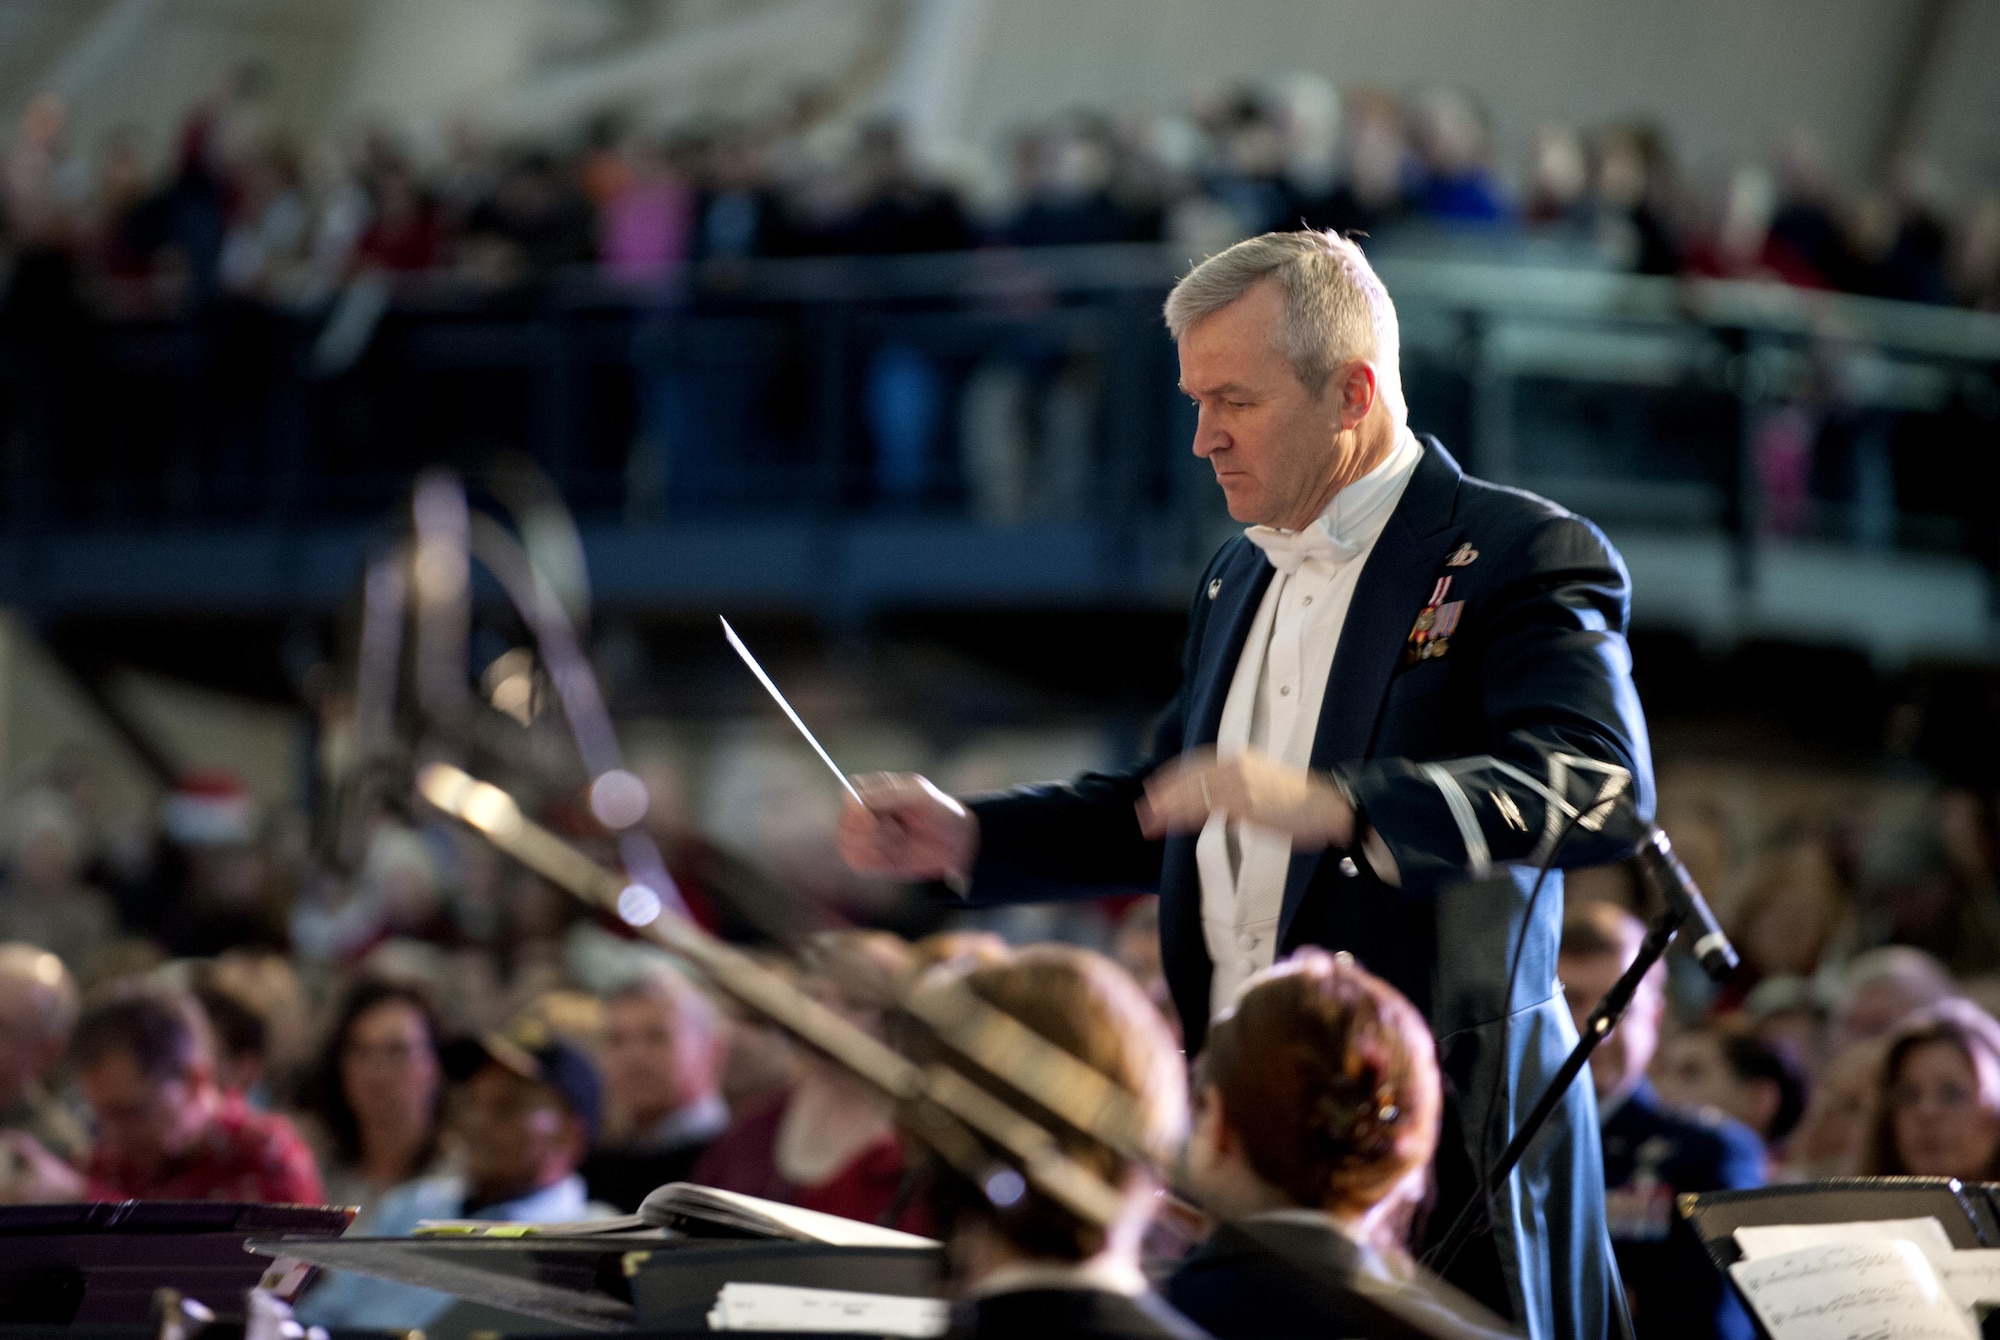 Col. Larry Lang conducts the U.S. Air Force Band during the “Spirit of the Season 2013” concert Dec. 15, 2013, at the Smithsonian National Air and Space Museum, Udvar-Hazy Center, Chantilly, Va. The band partnered with the Smithsonian Air and Space Museum to hold two performances for museum guests. Lang is the Air Force Band commander and conductor. (U.S. Air Force photo/Staff Sgt. Carlin Leslie)